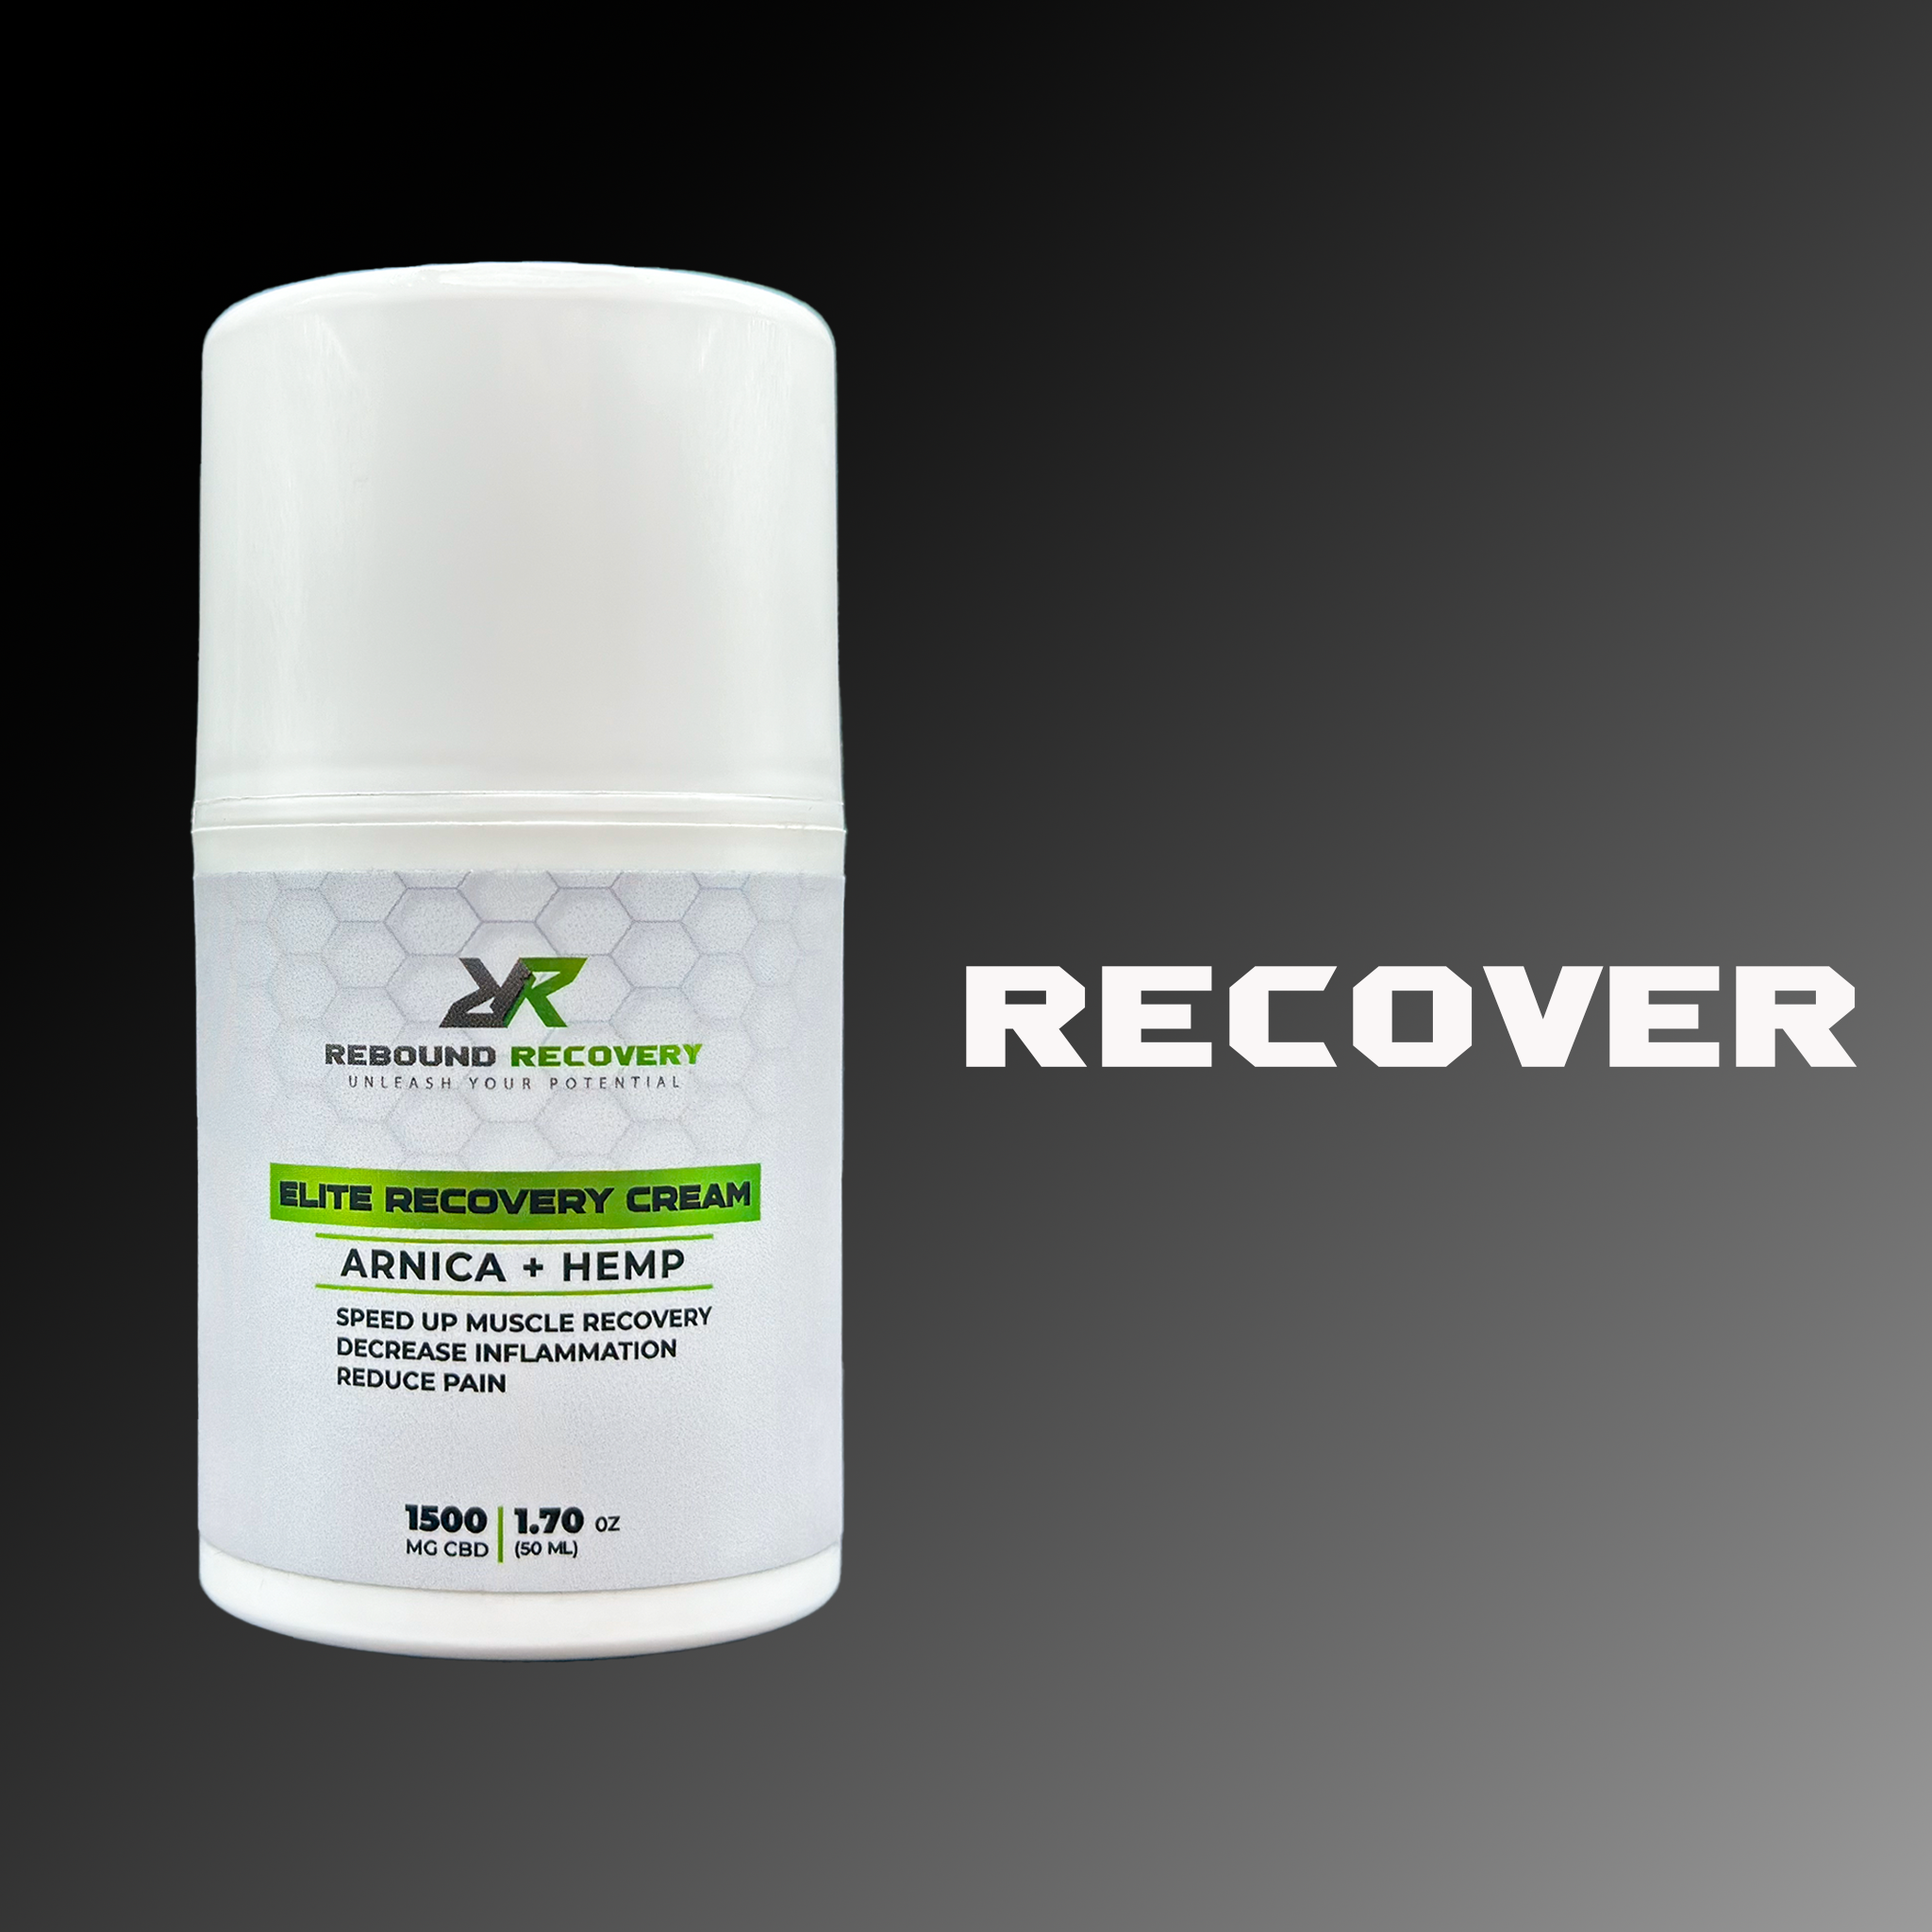 Recover with elite recovery cream